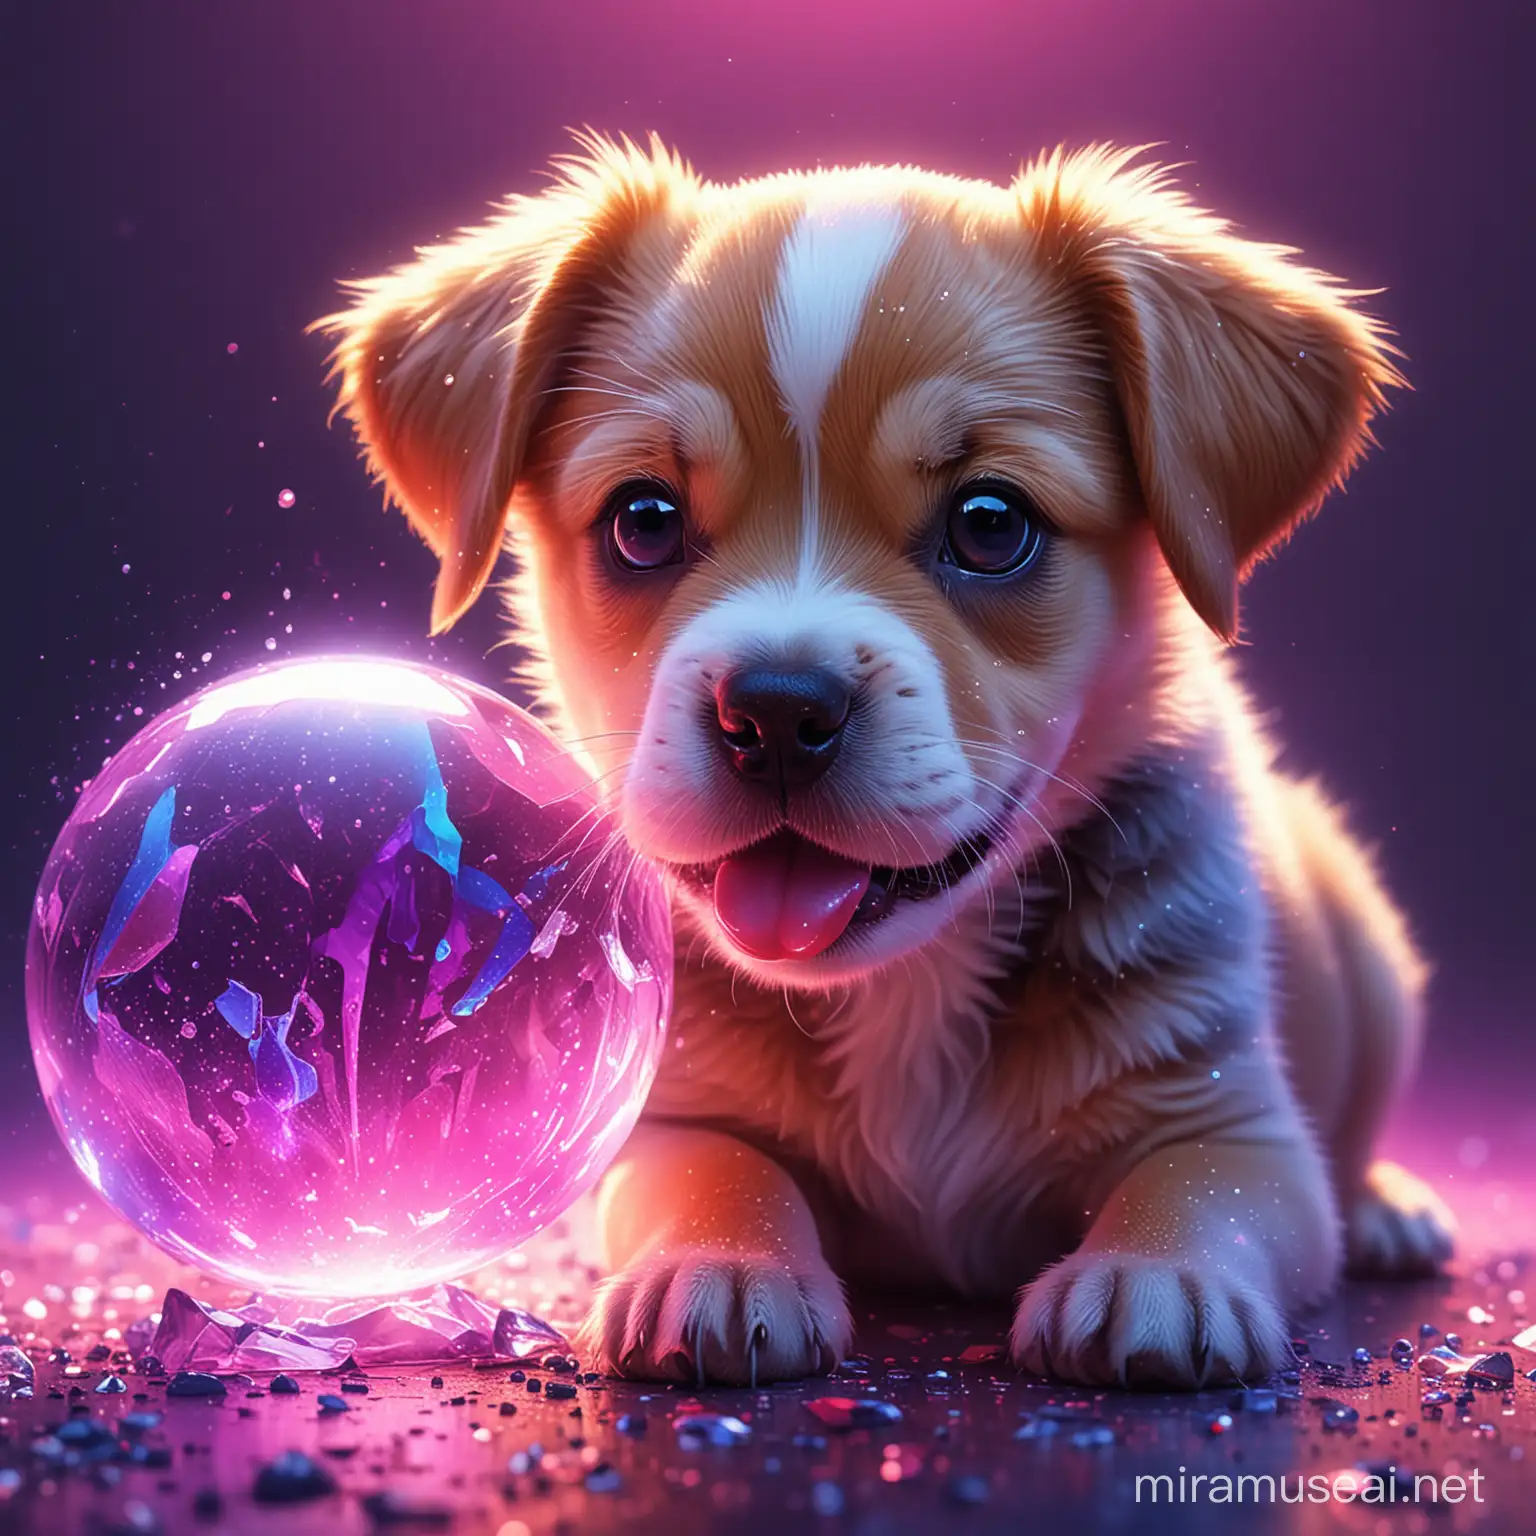 Playful Puppy with Crystal Ball in Vibrant Digital Art